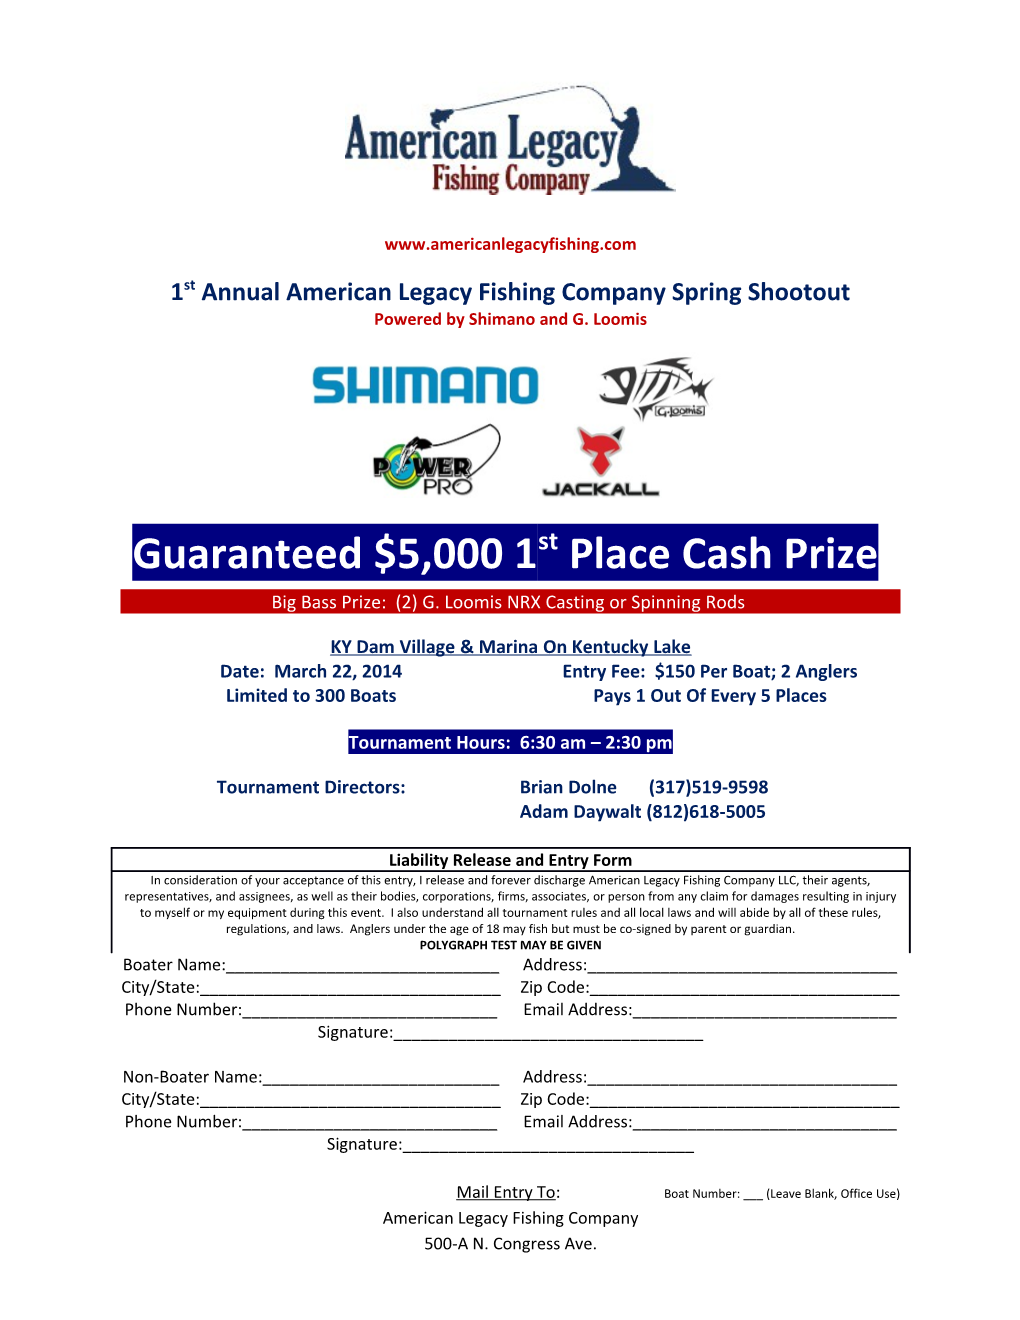 1St Annual American Legacy Fishing Company Spring Shootout